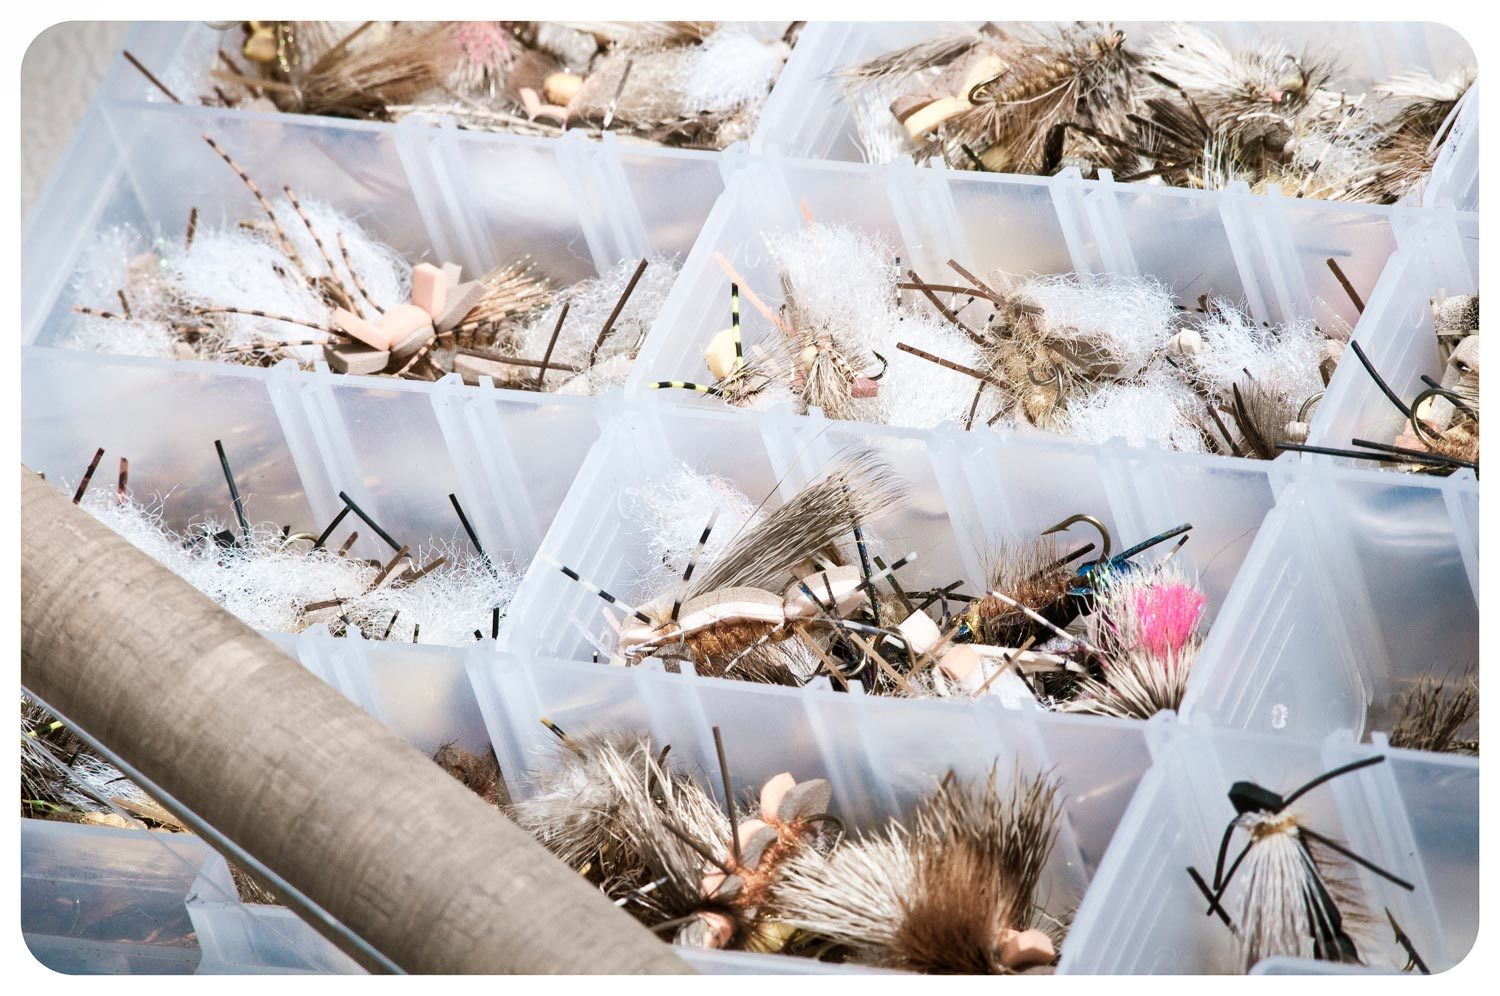 Sunday Classic / Use Old Plano Boxes For Bulk Fly Storage - Fly